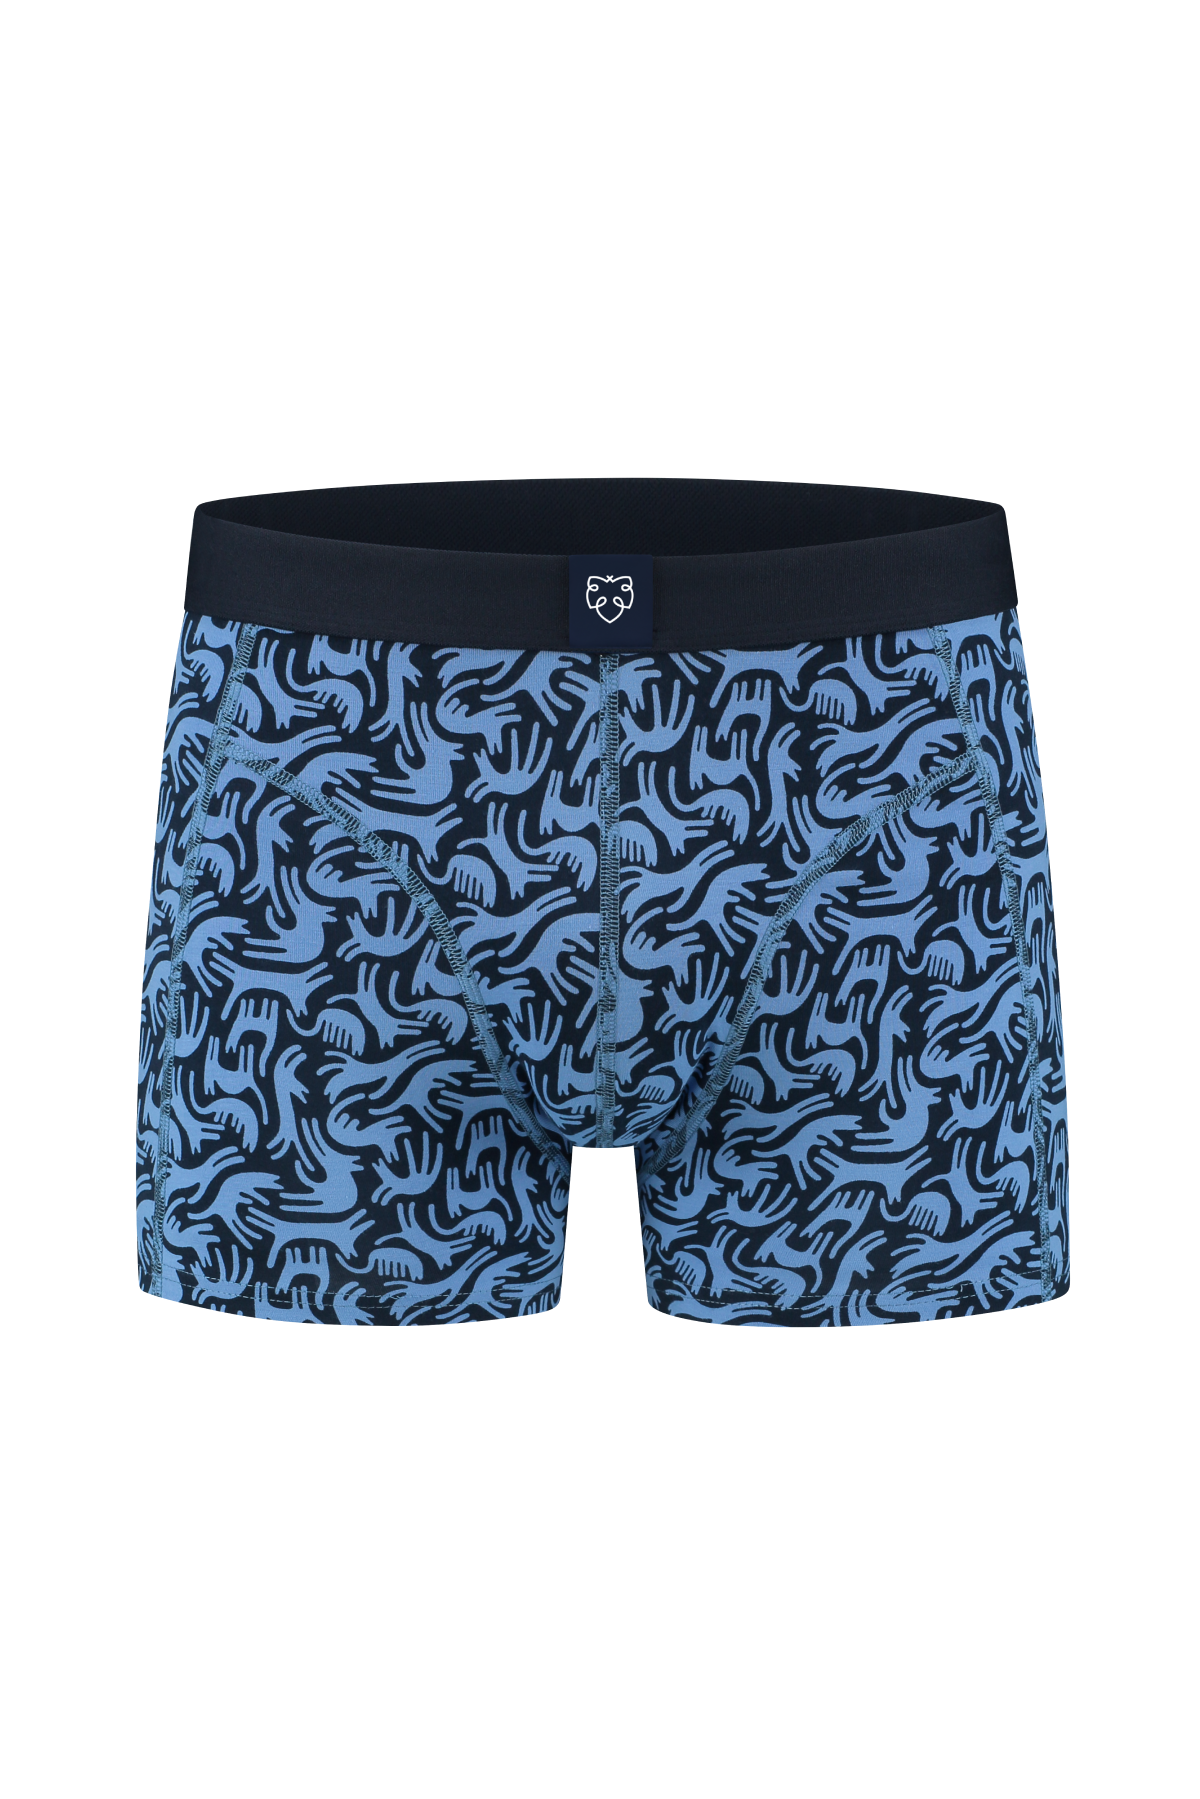 A-dam blue boxer briefs with monkeys print from pure organic